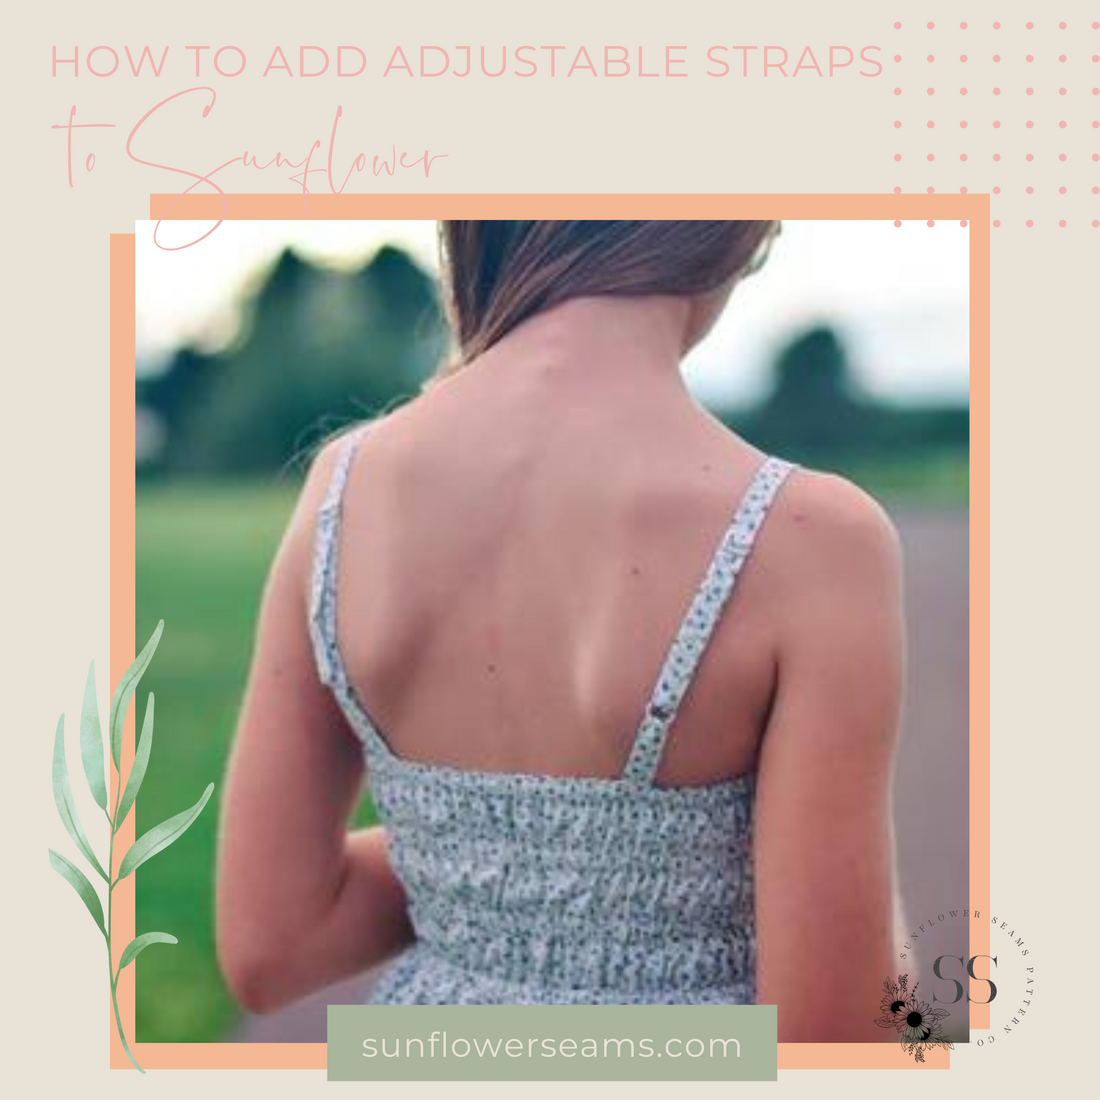 How to Add Adjustable Straps to Sunflower